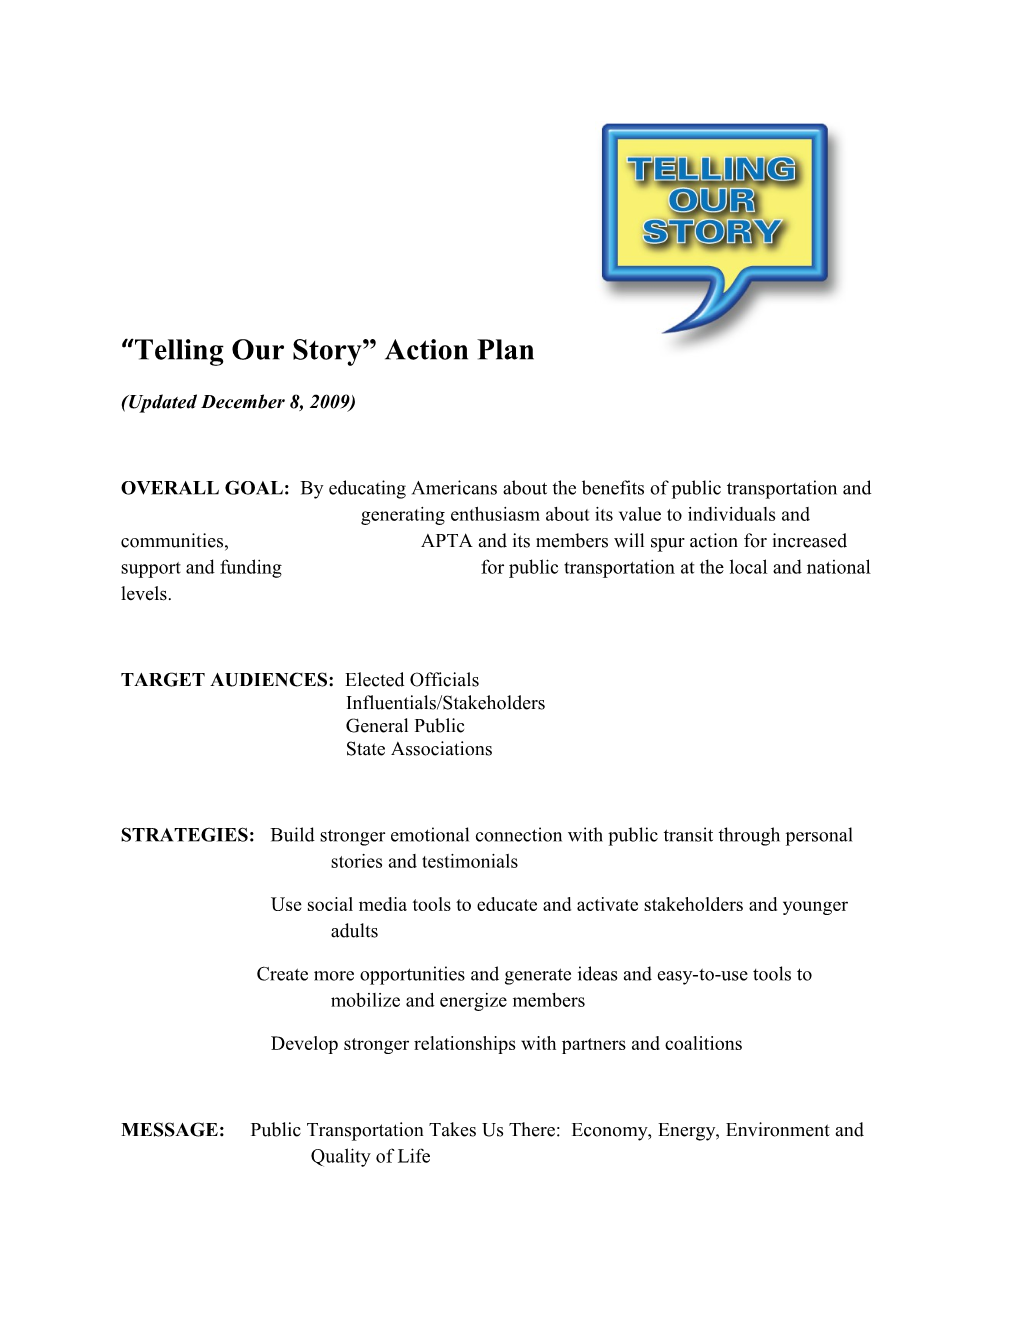 Tell Our Story Action Plan